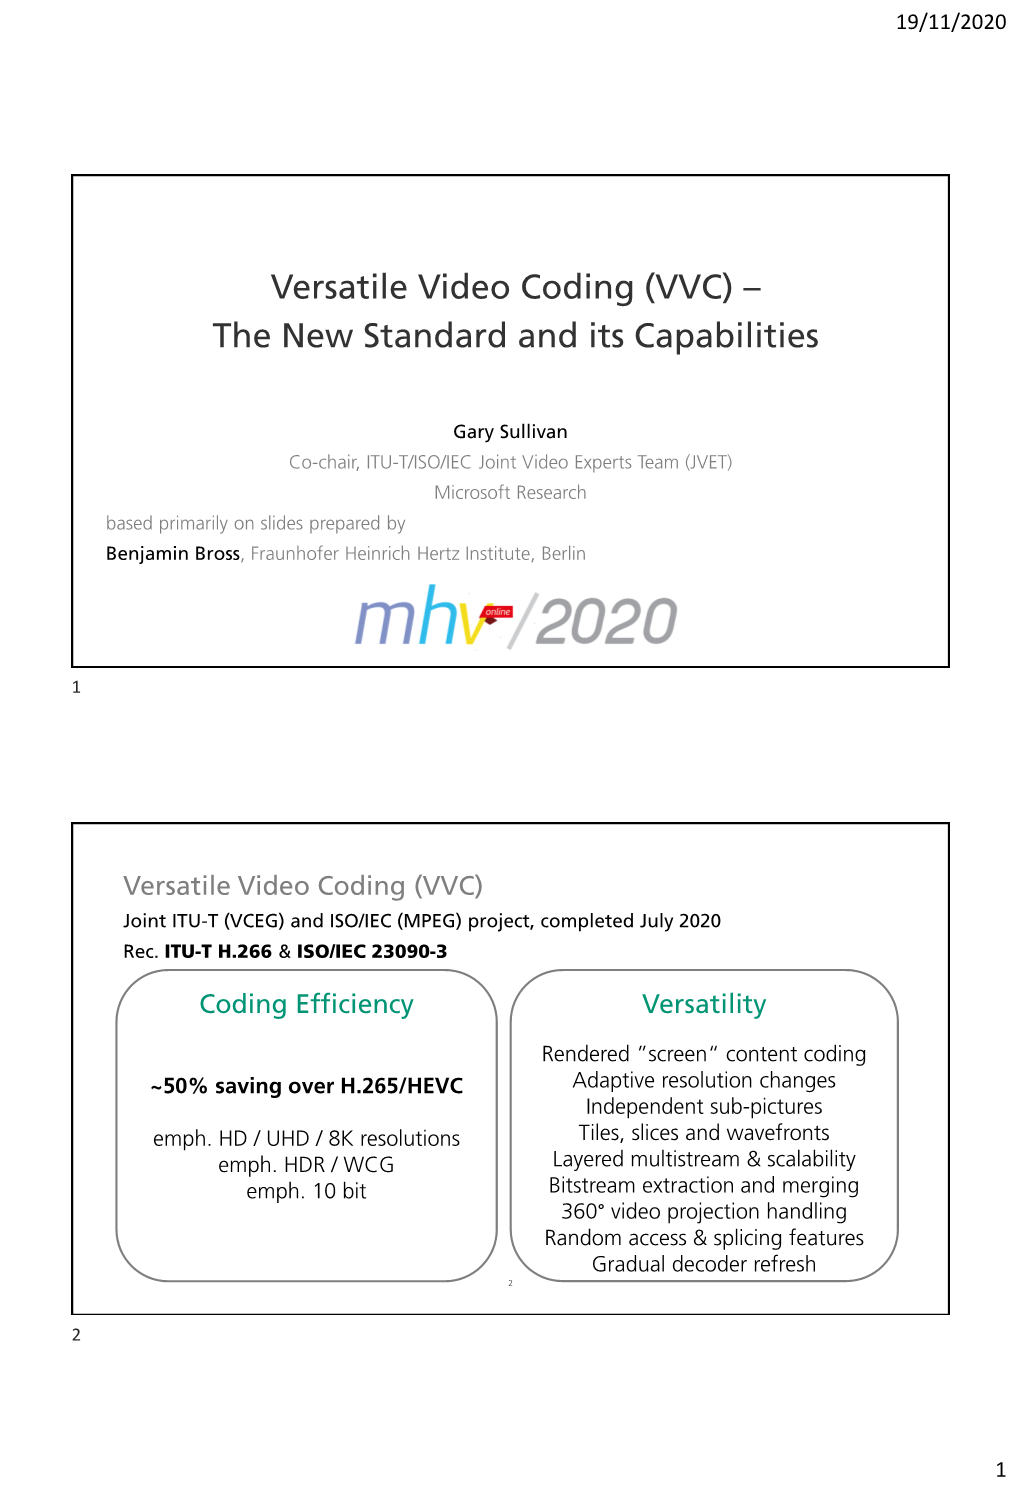 Versatile Video Coding (VVC) – the New Standard and Its Capabilities